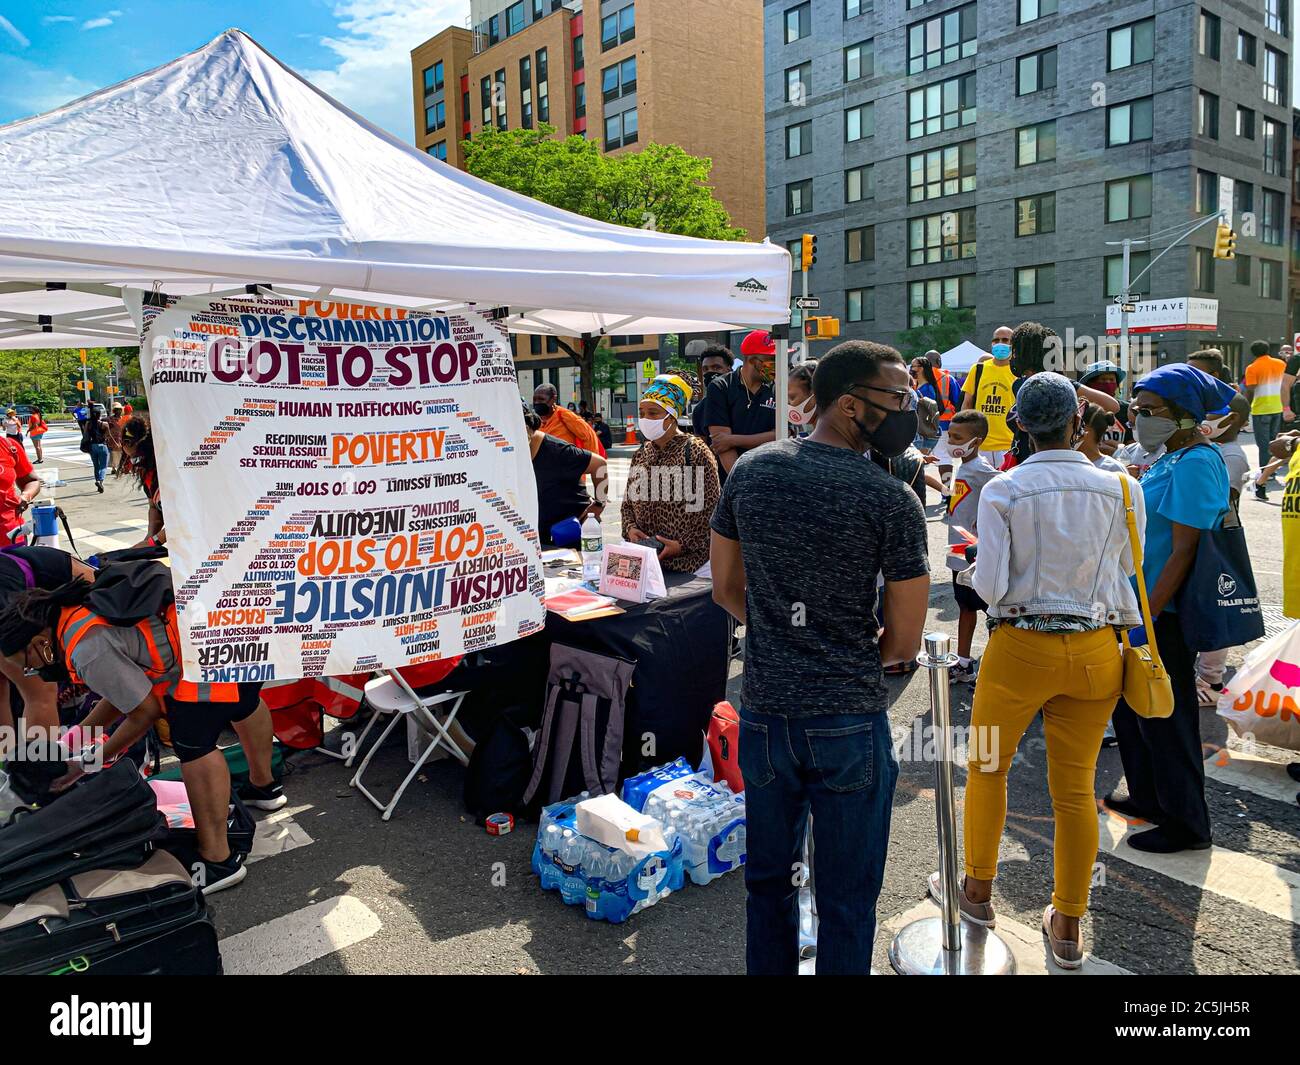 New York, USA. 3rd July, 2020. (NEW) Launching of Black Lives MatterÃ¢â‚¬â„¢s Mural in Harlem. July 3, 2020, Harlem, New York, USA: The official launching of the Black Lives MatterÃ¢â‚¬â„¢s Mural on Adam Clayton Powell jr Boulevard with W 125 to 127 streets in Harlem which is closed to the public from July 2nd till July 10th . They are protesting against the police murder of George Floyd in Minneapolis on May 25 and police brutality on blacks . Credit : Niyi Fote/Thenews2 Credit: Niyi Fote/TheNEWS2/ZUMA Wire/Alamy Live News Stock Photo